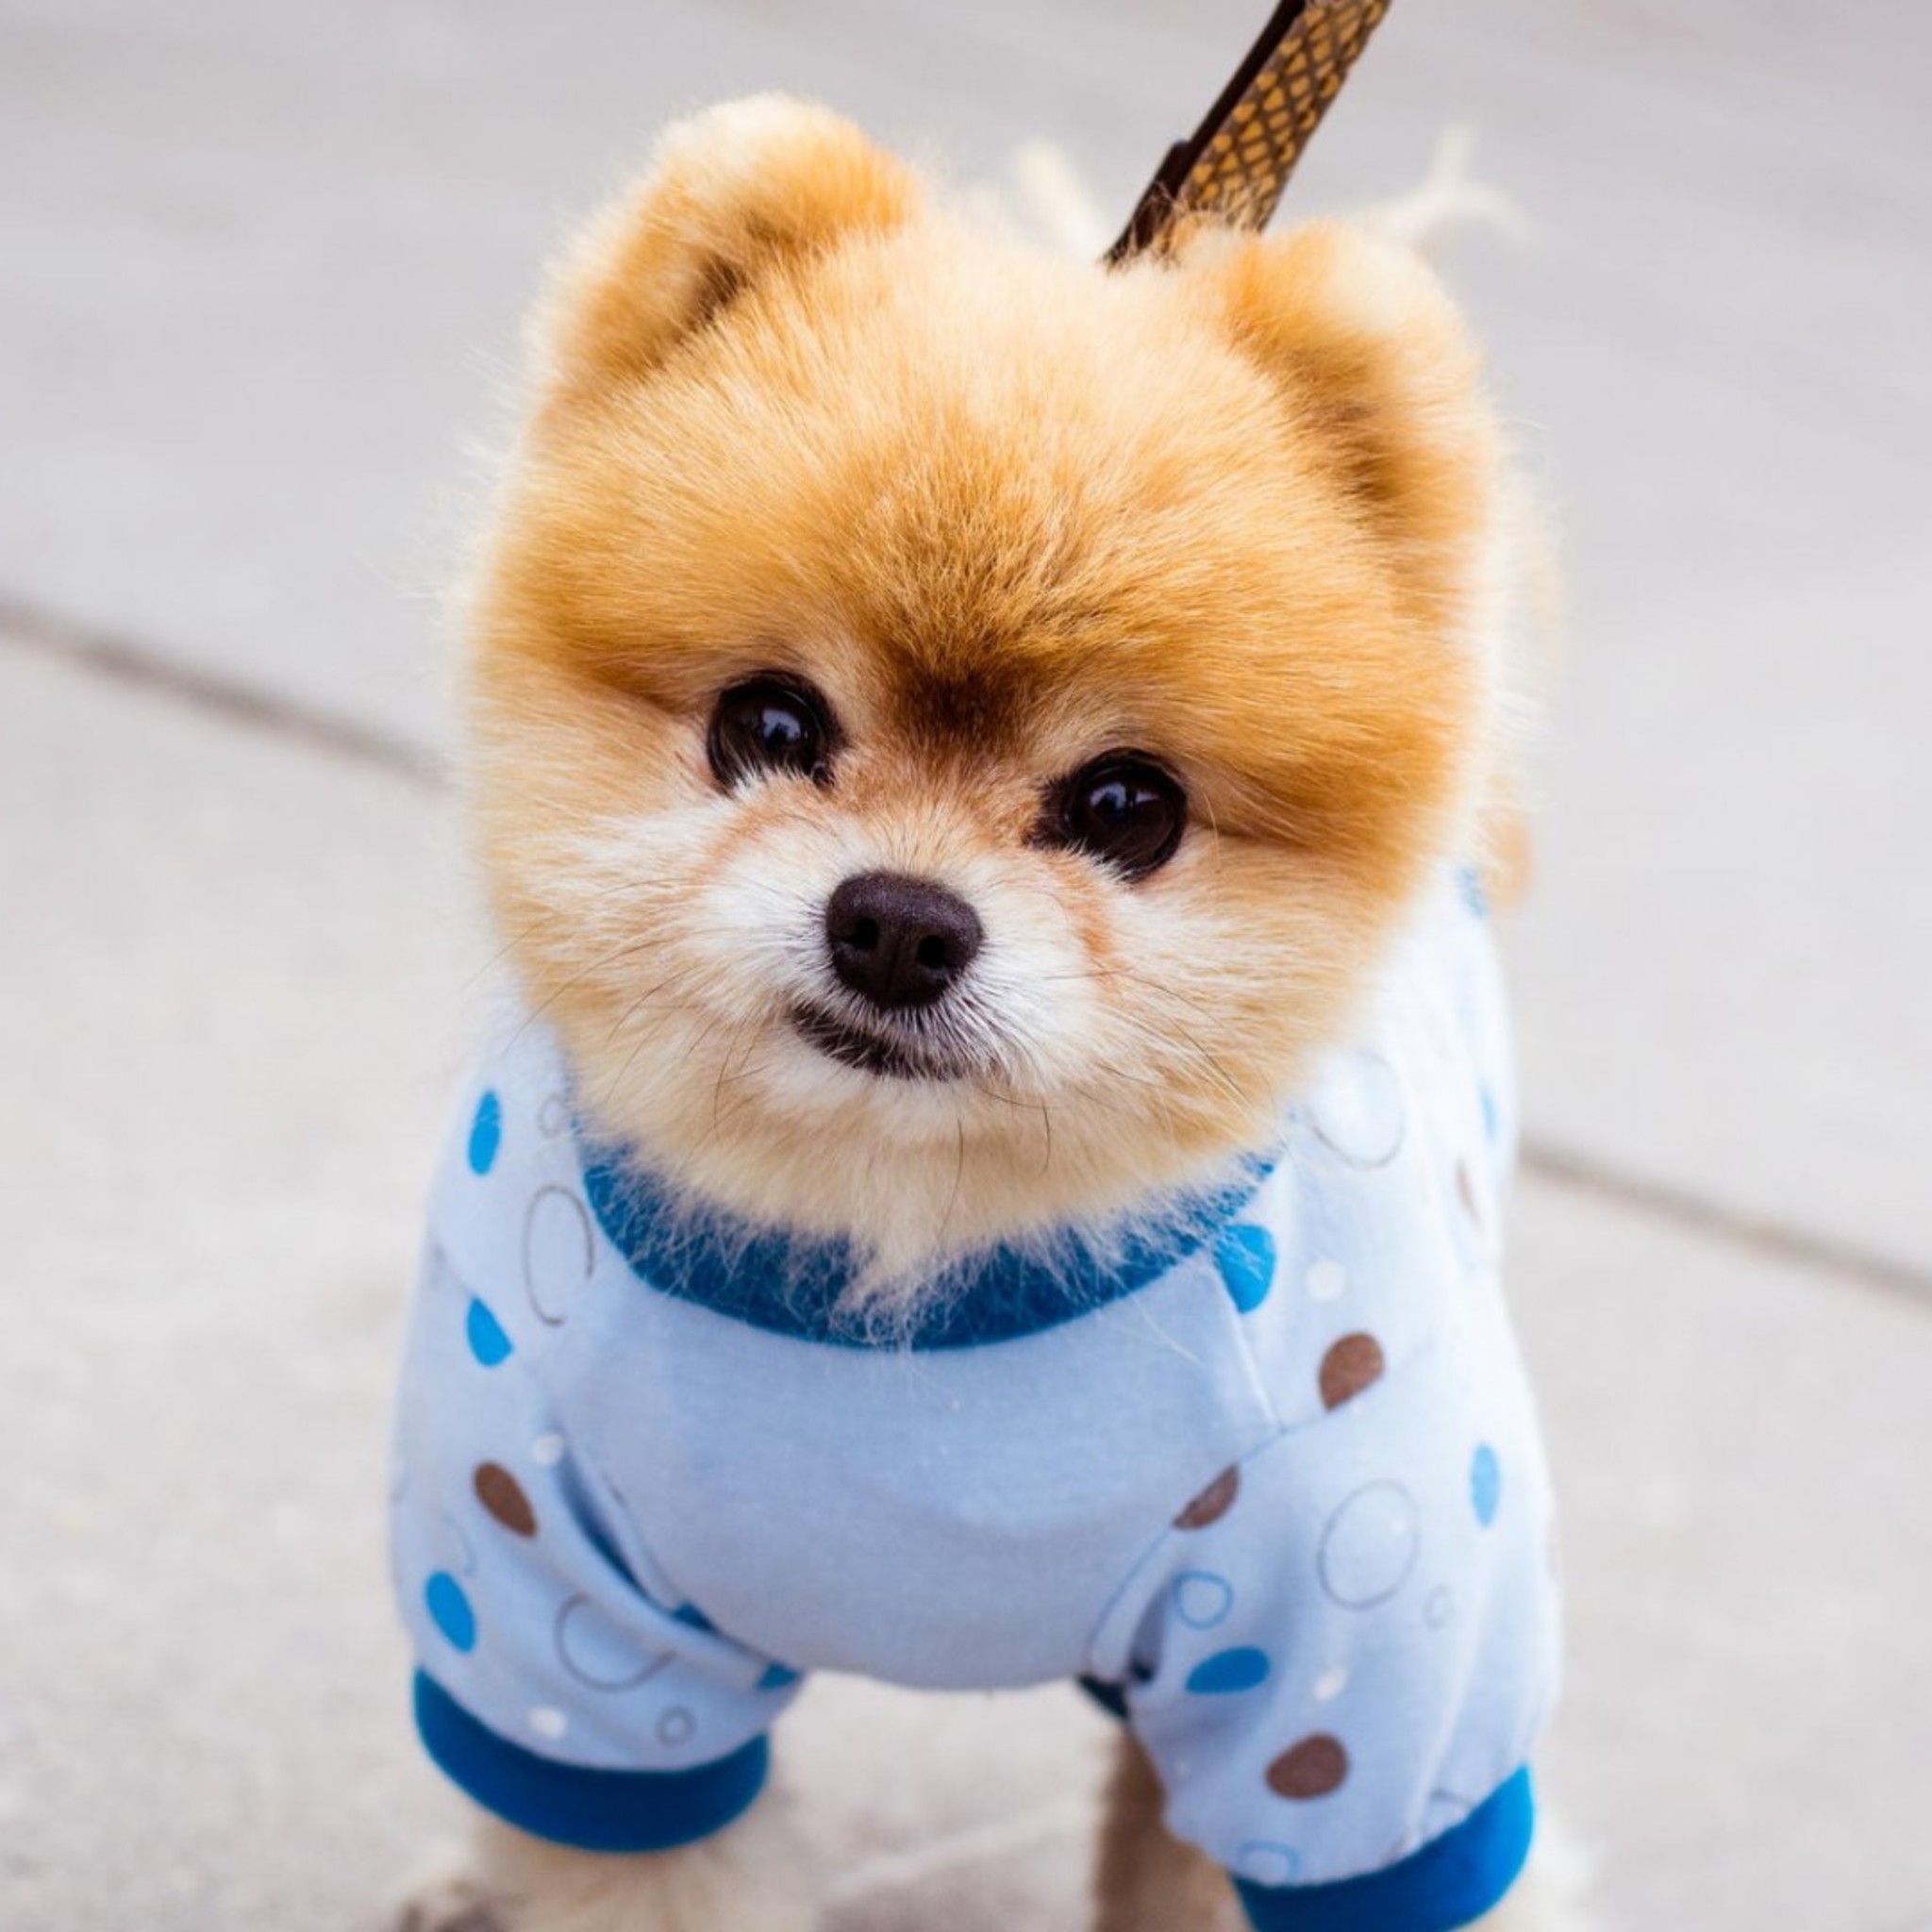 Boo - Best Wallpapers Cute Dogs , HD Wallpaper & Backgrounds